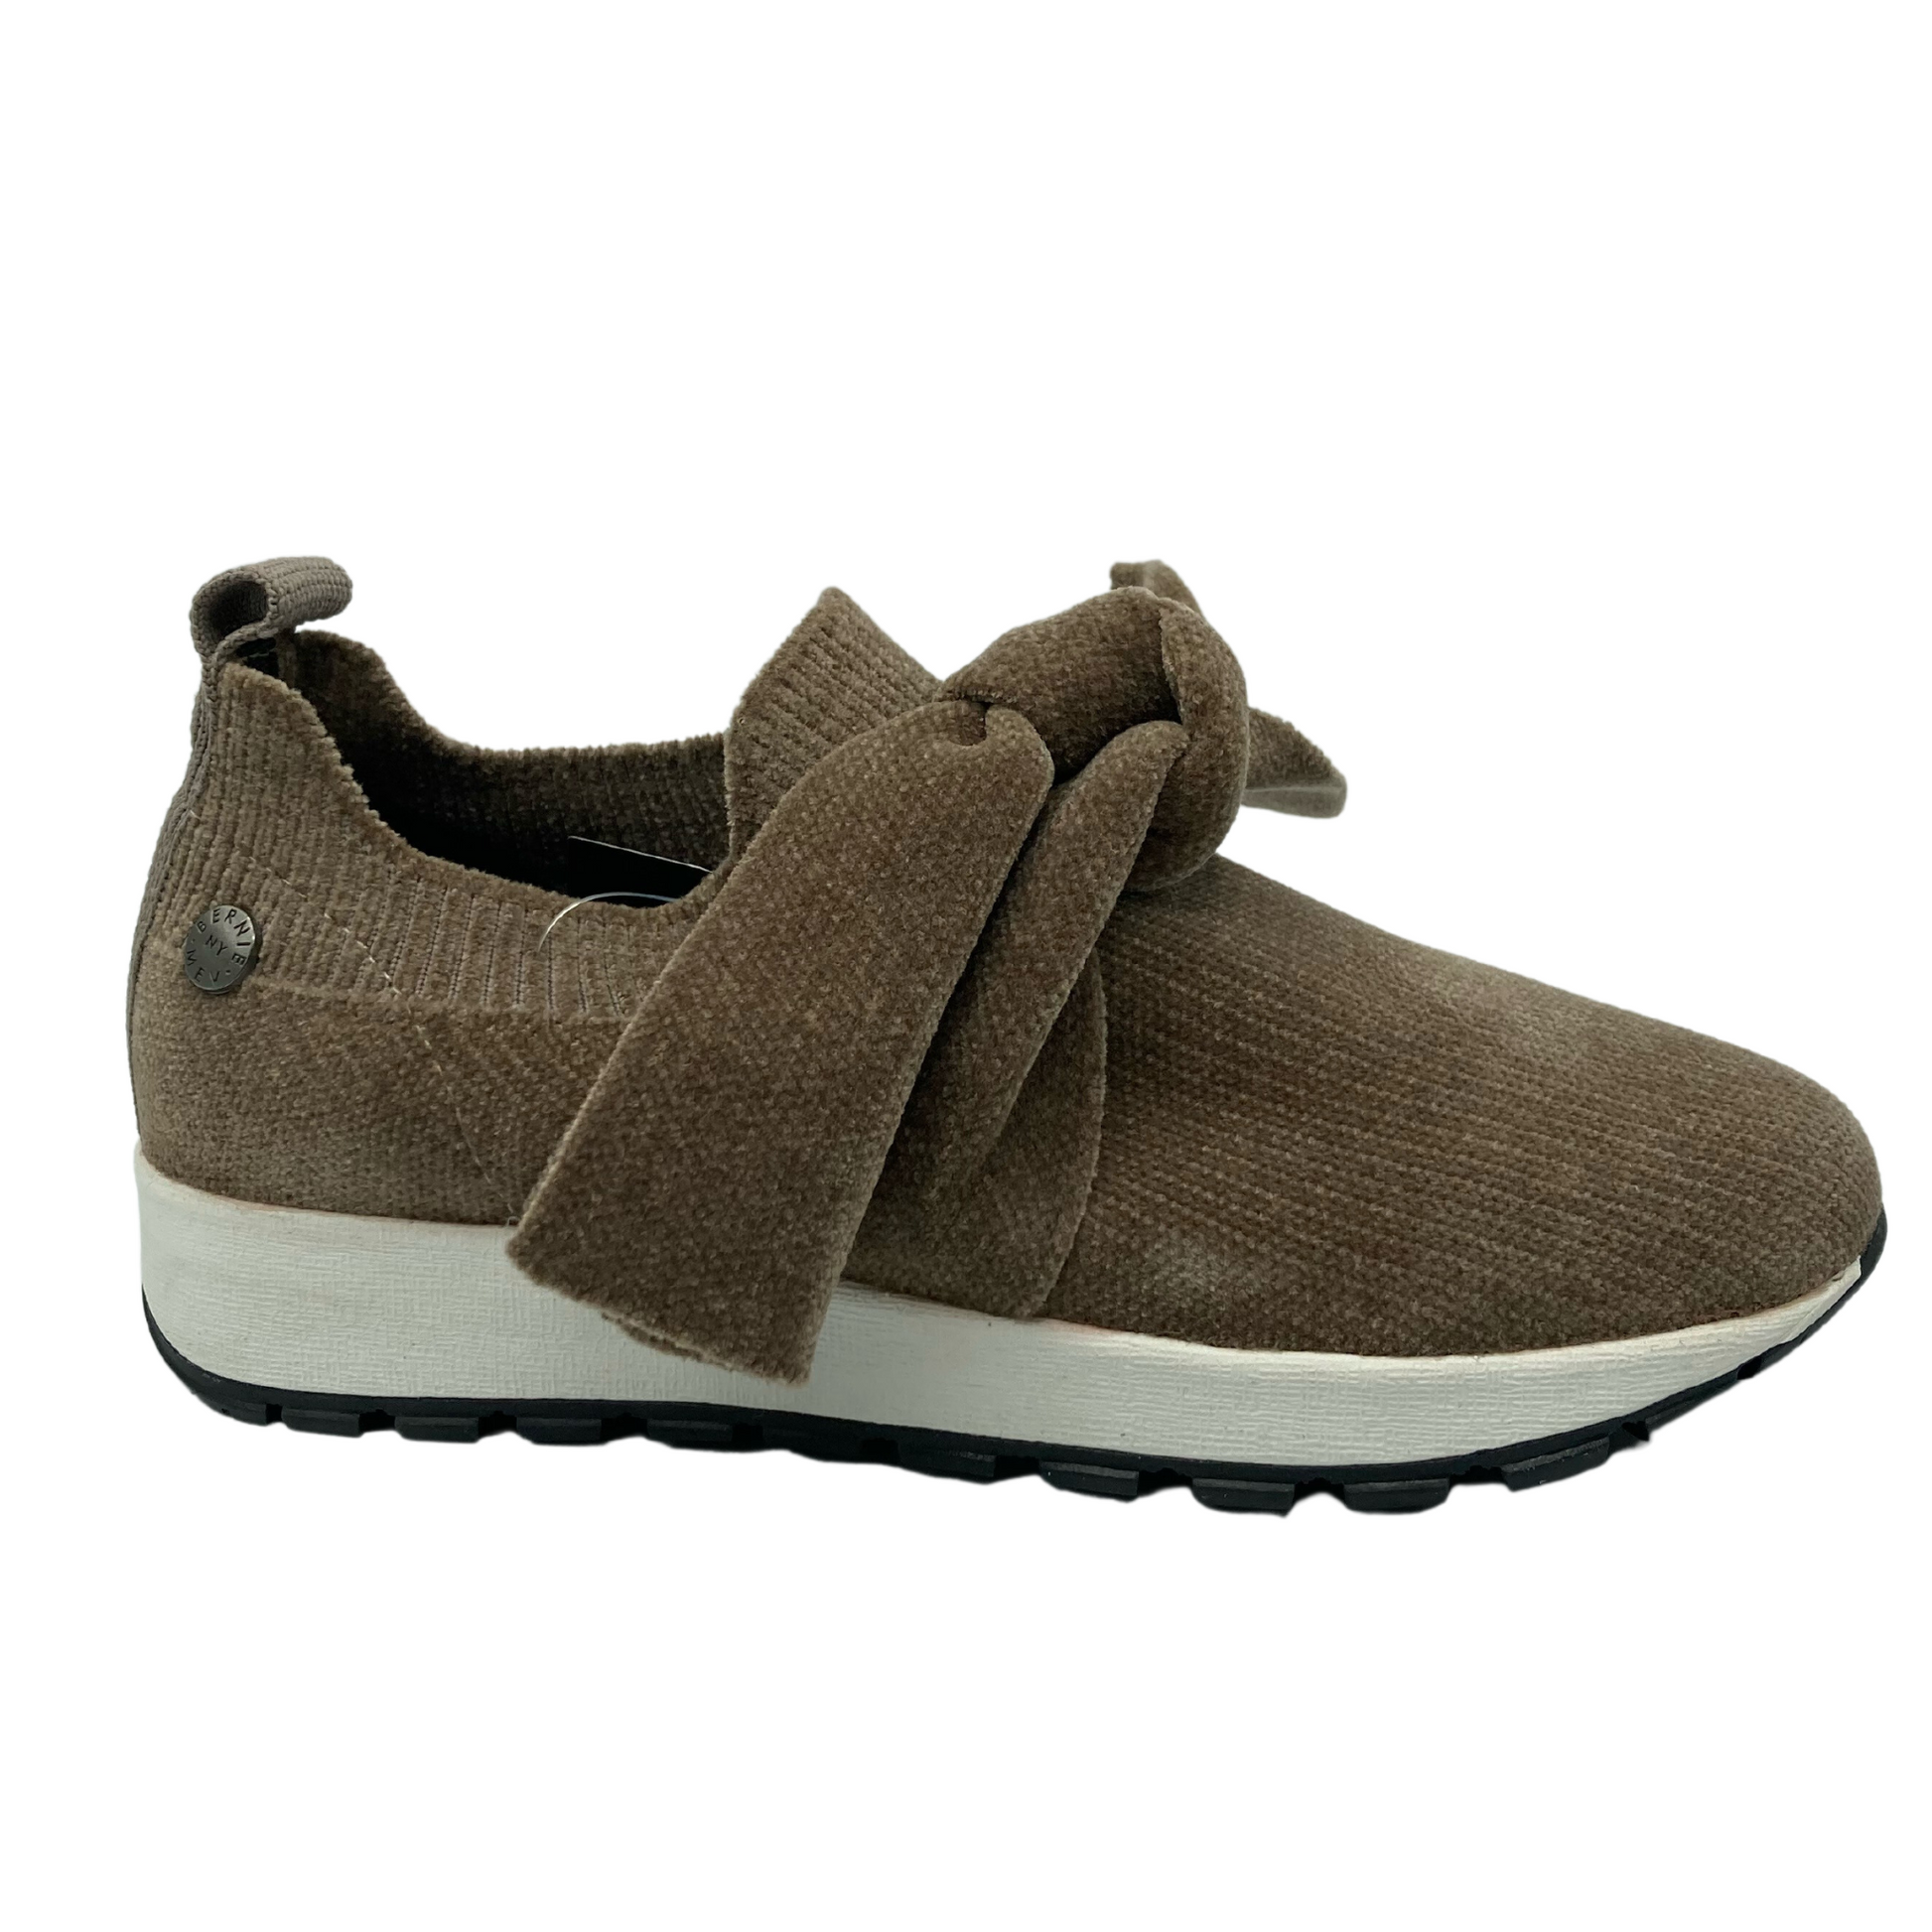 Right facing view of slip on brown sneaker with bow detail on upper and thick rubber outsole